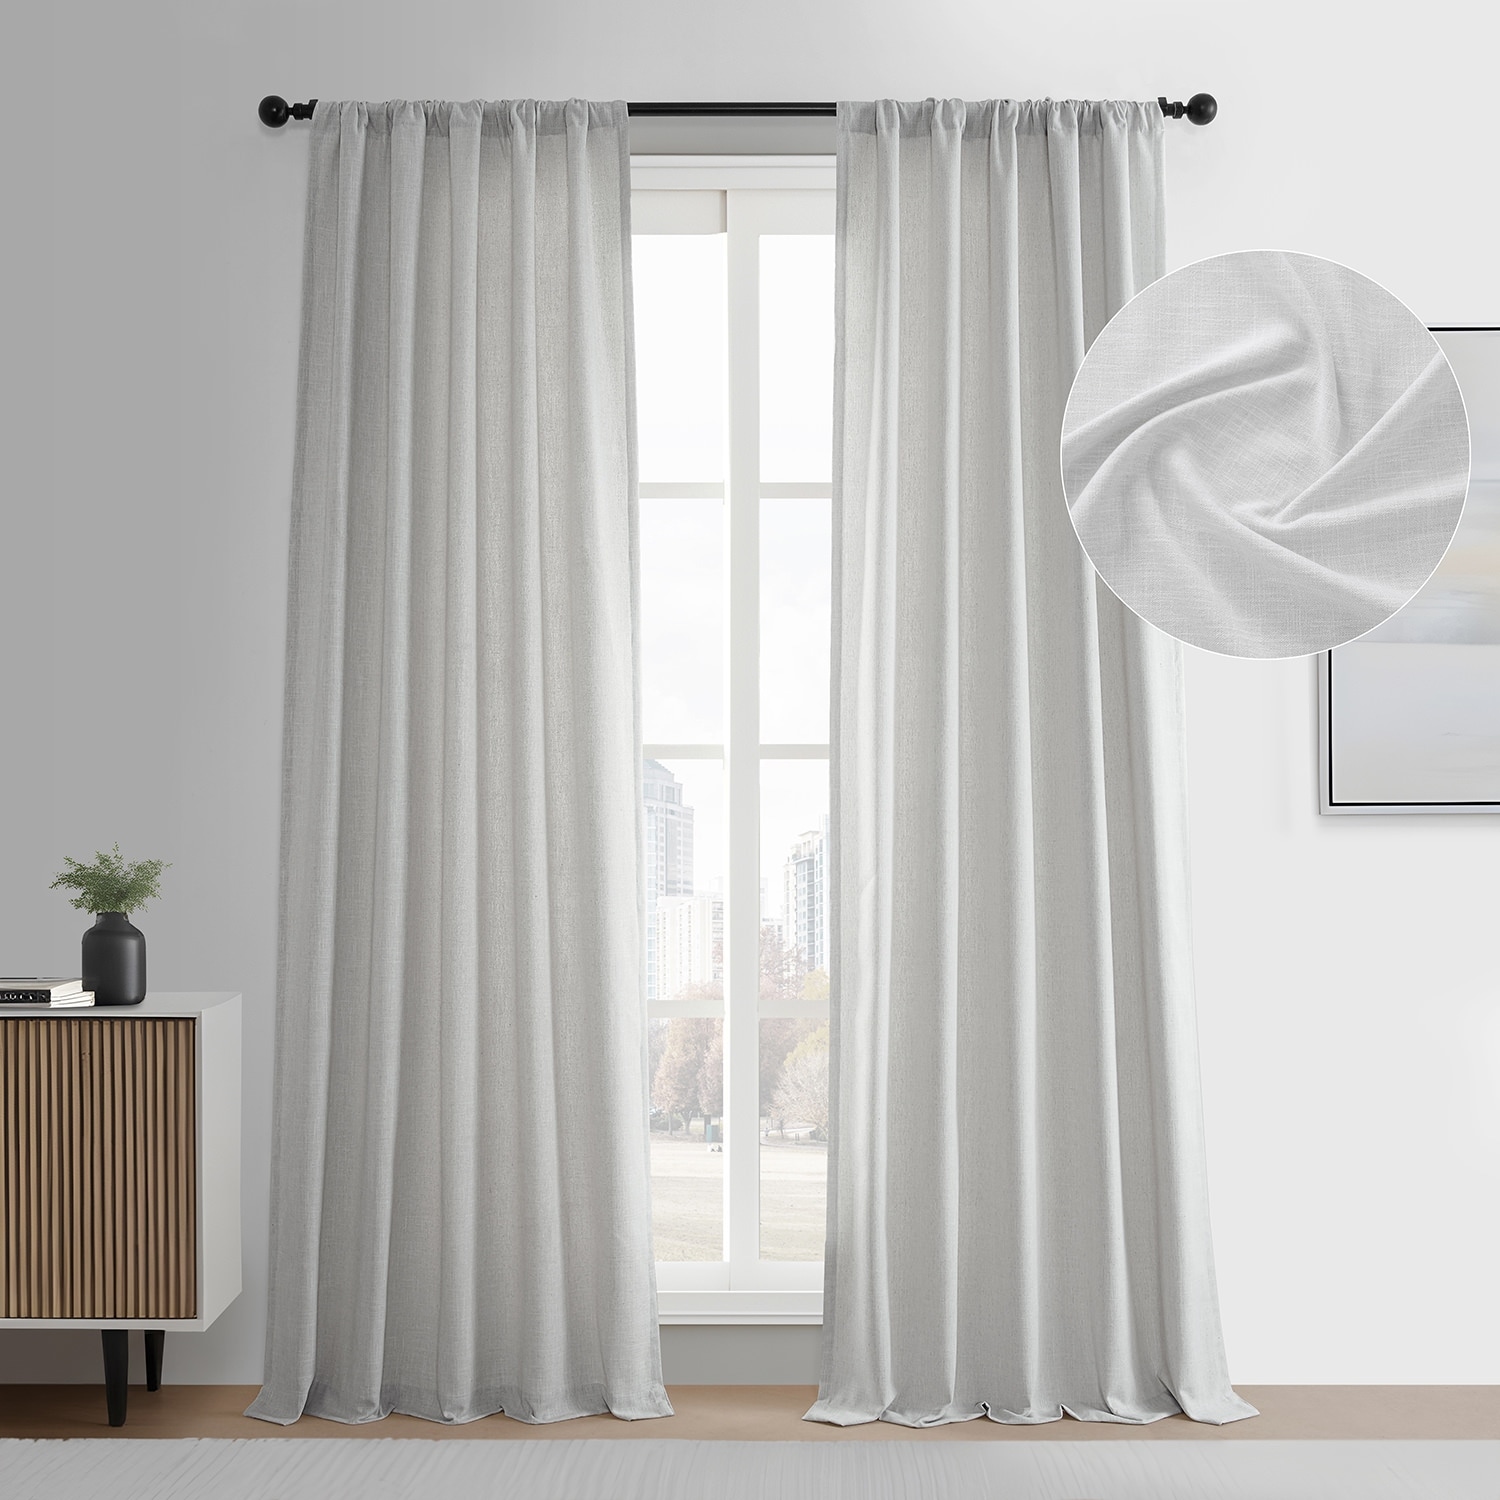 Exclusive Fabrics Simply Faux Linen Curtains - 2 Panels - Light Filtering Window Curtains